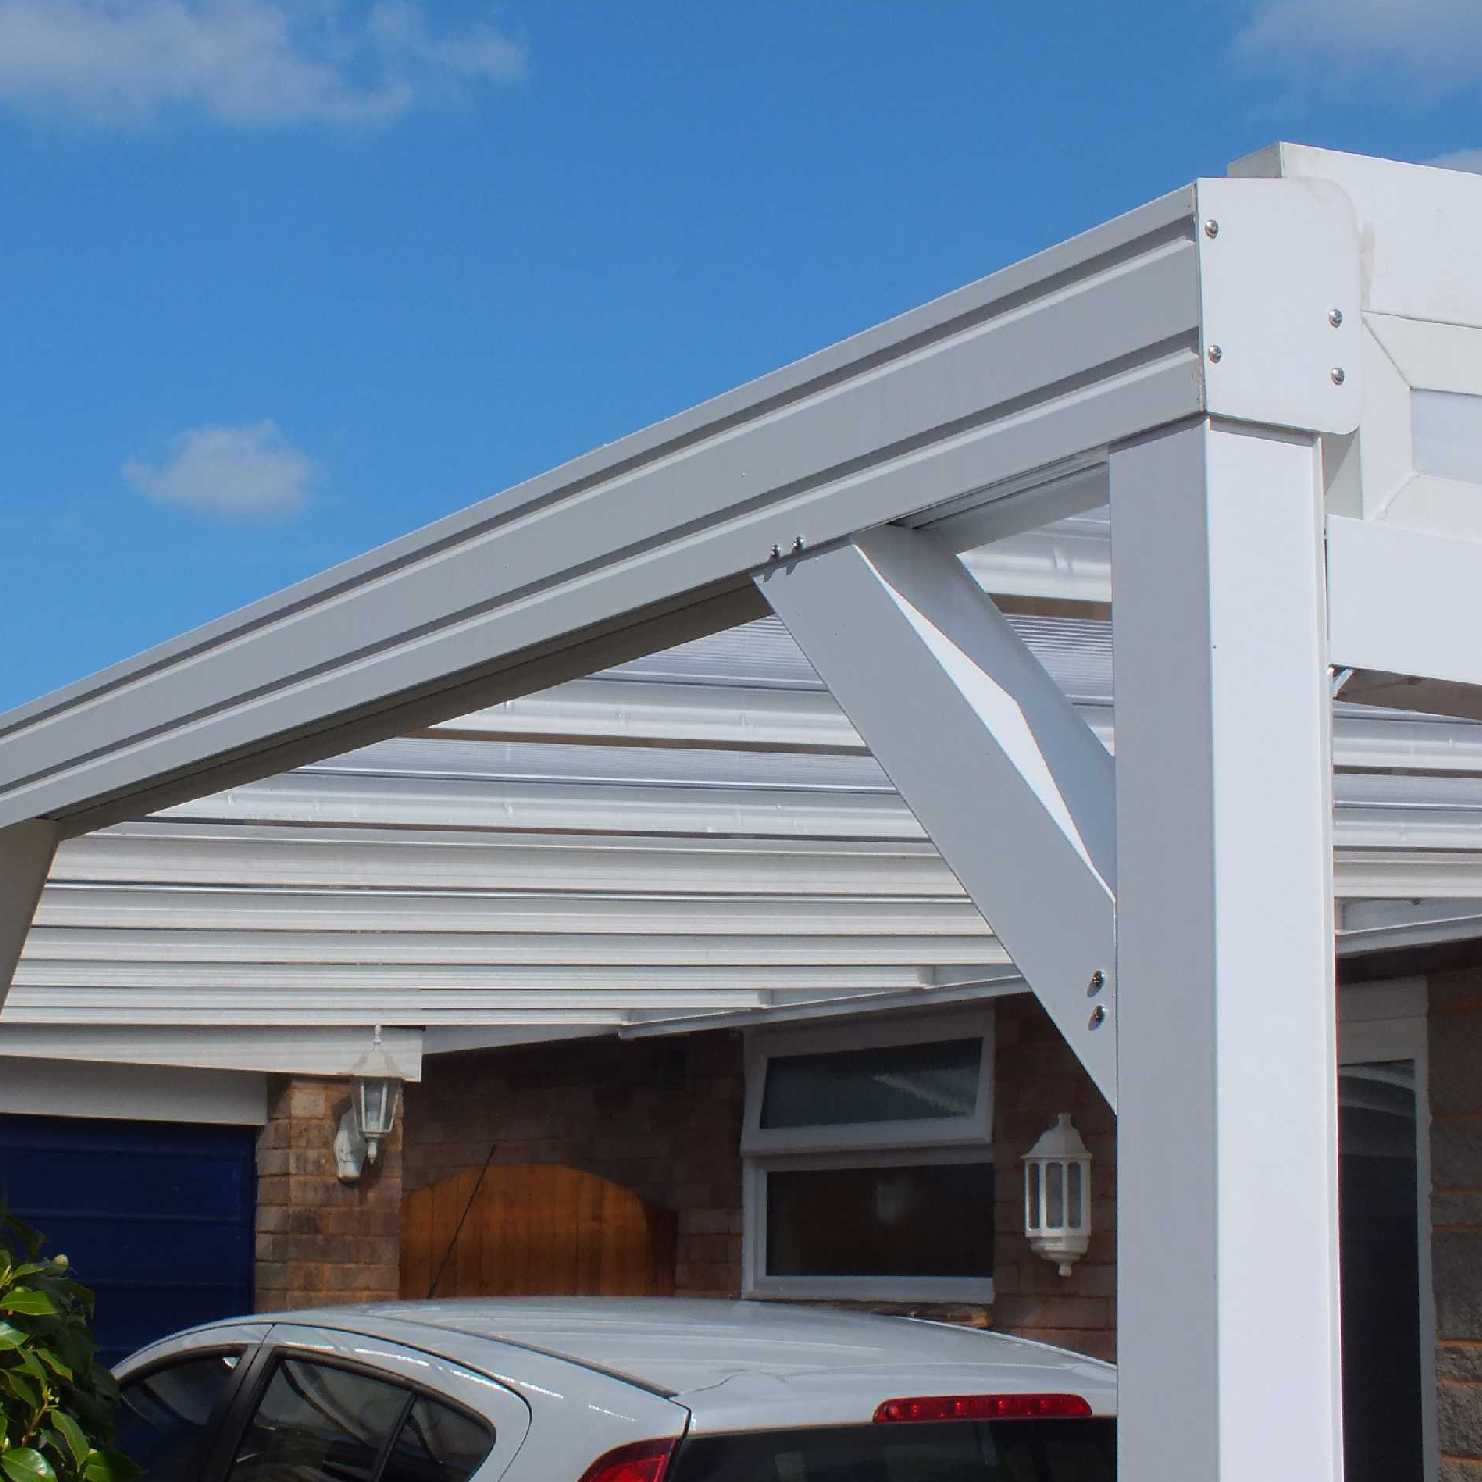 Great deals on Omega Smart Lean-To Canopy, White with 16mm Polycarbonate Glazing - 2.1m (W) x 2.0m (P), (2) Supporting Posts